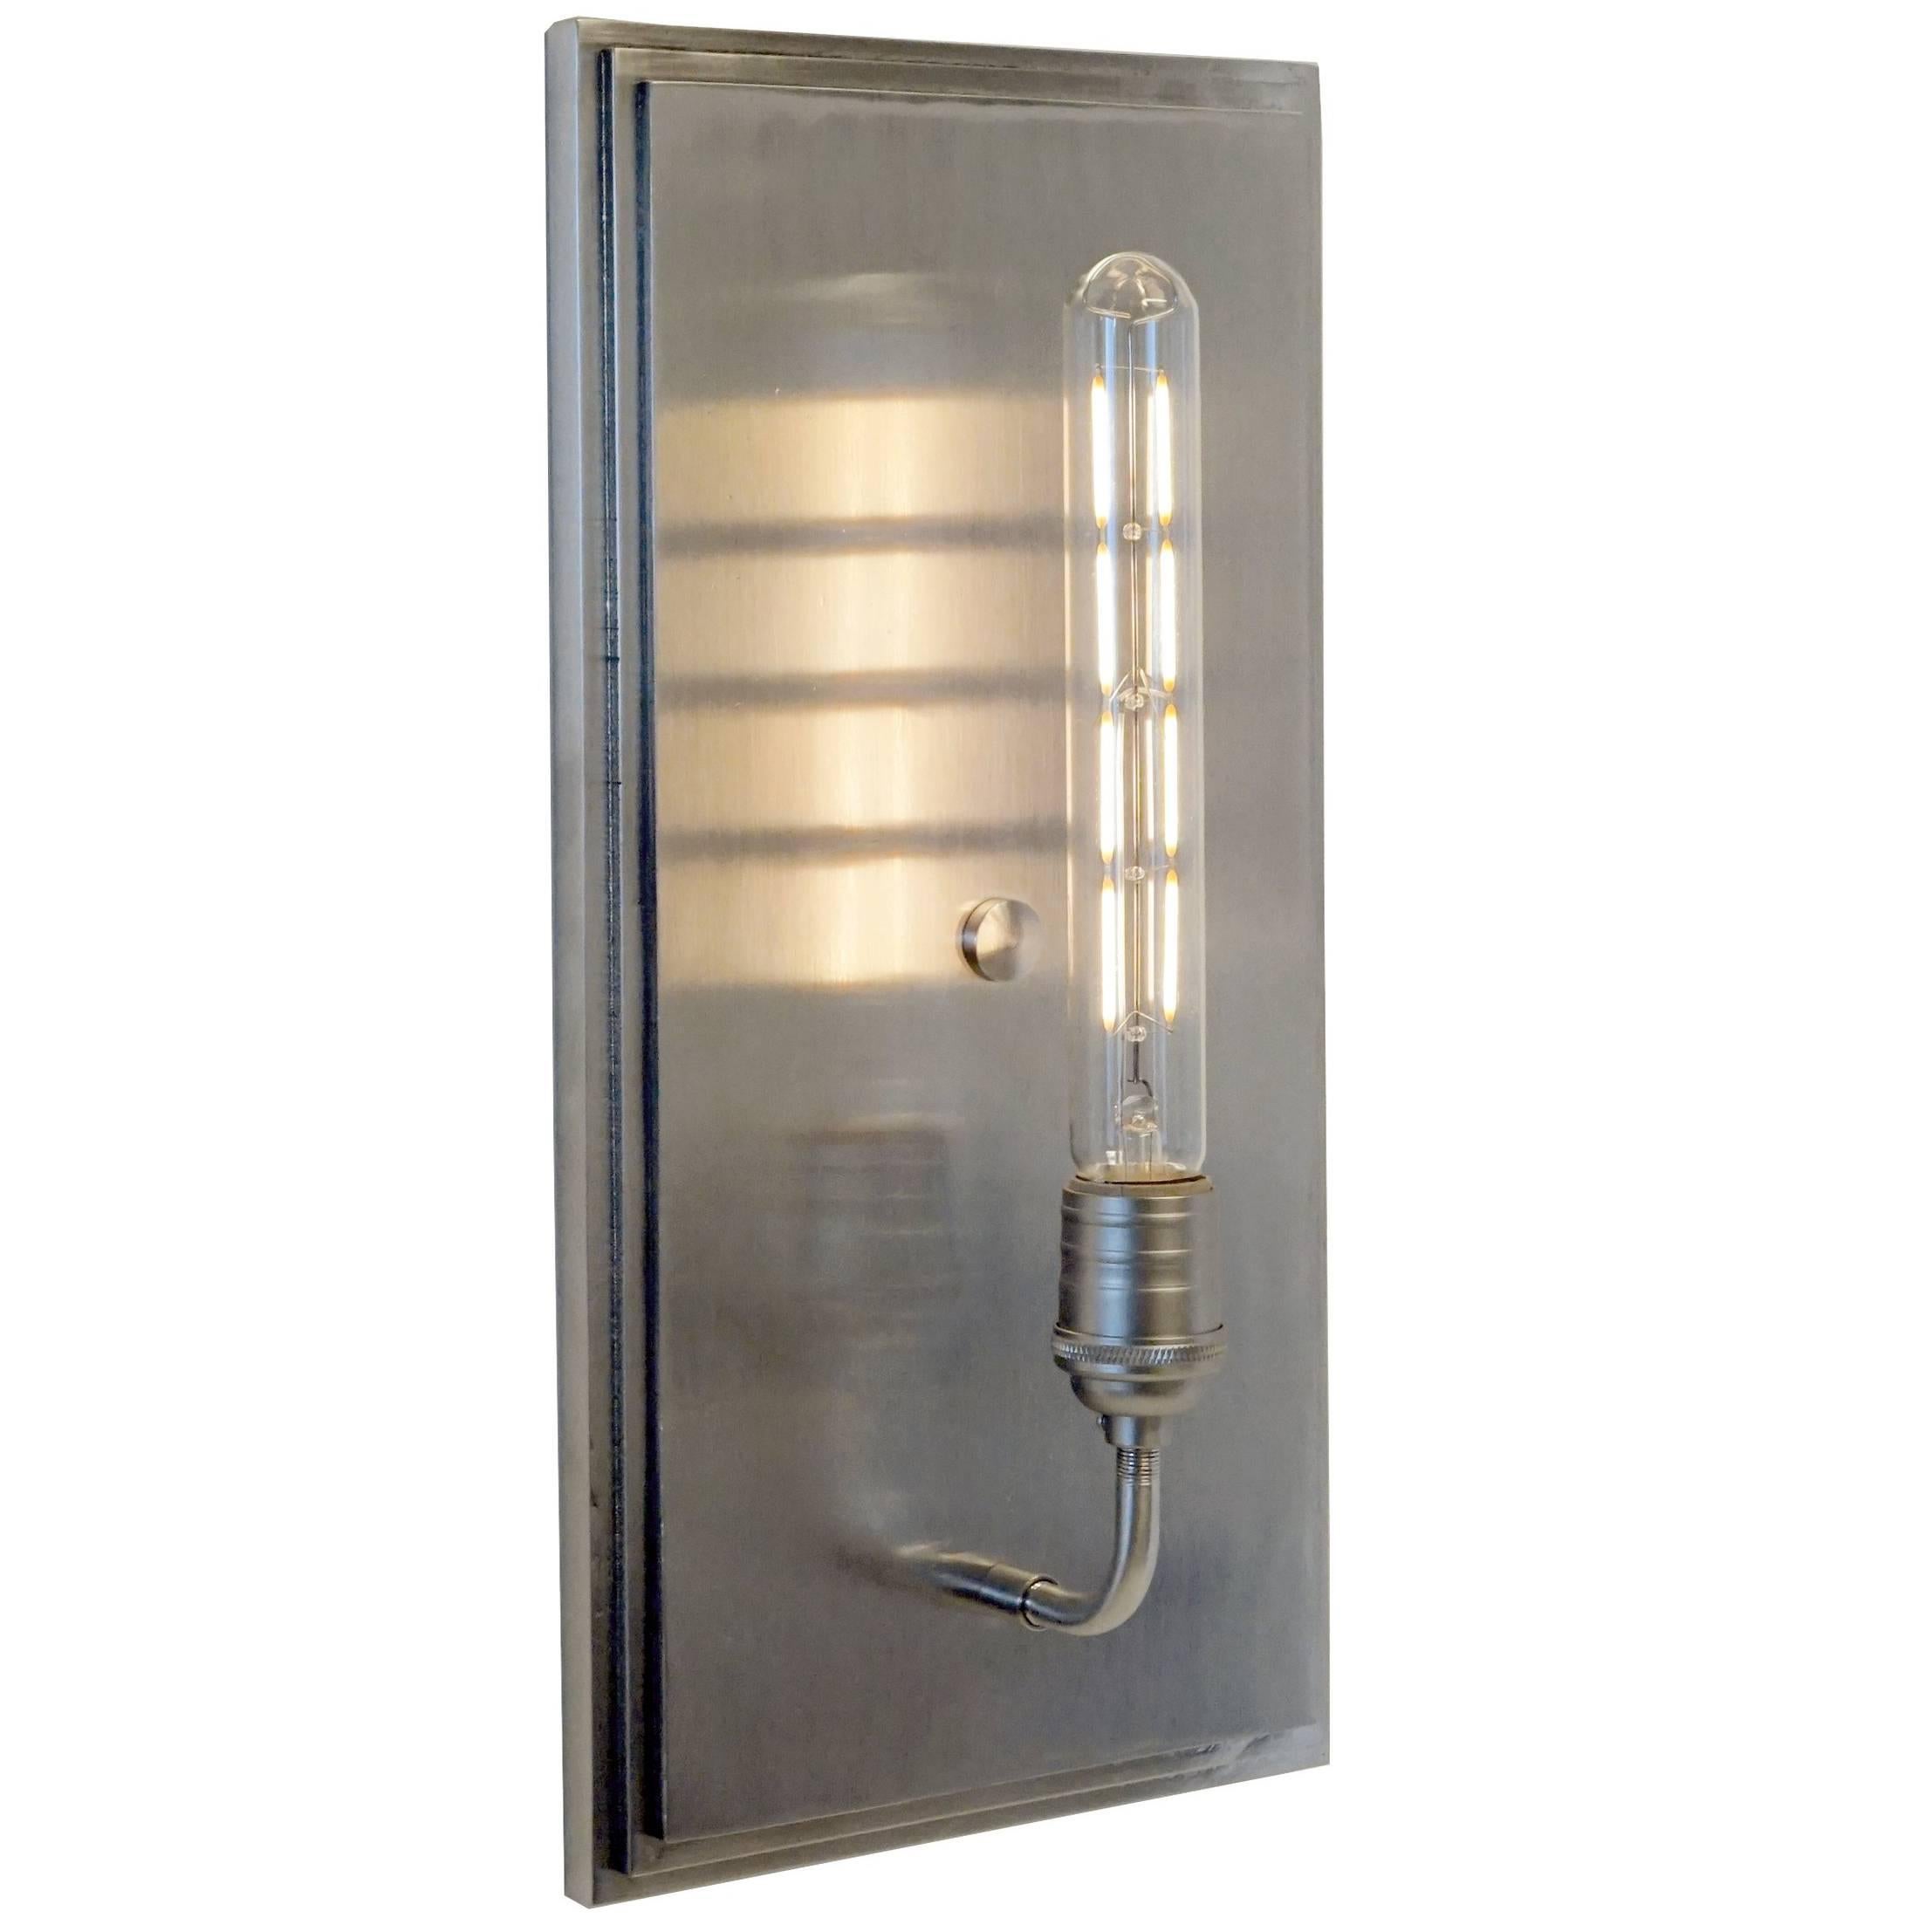 Contemporary, Minimal Interior Flat Wall Sconce Lantern in Brushed Nickel For Sale